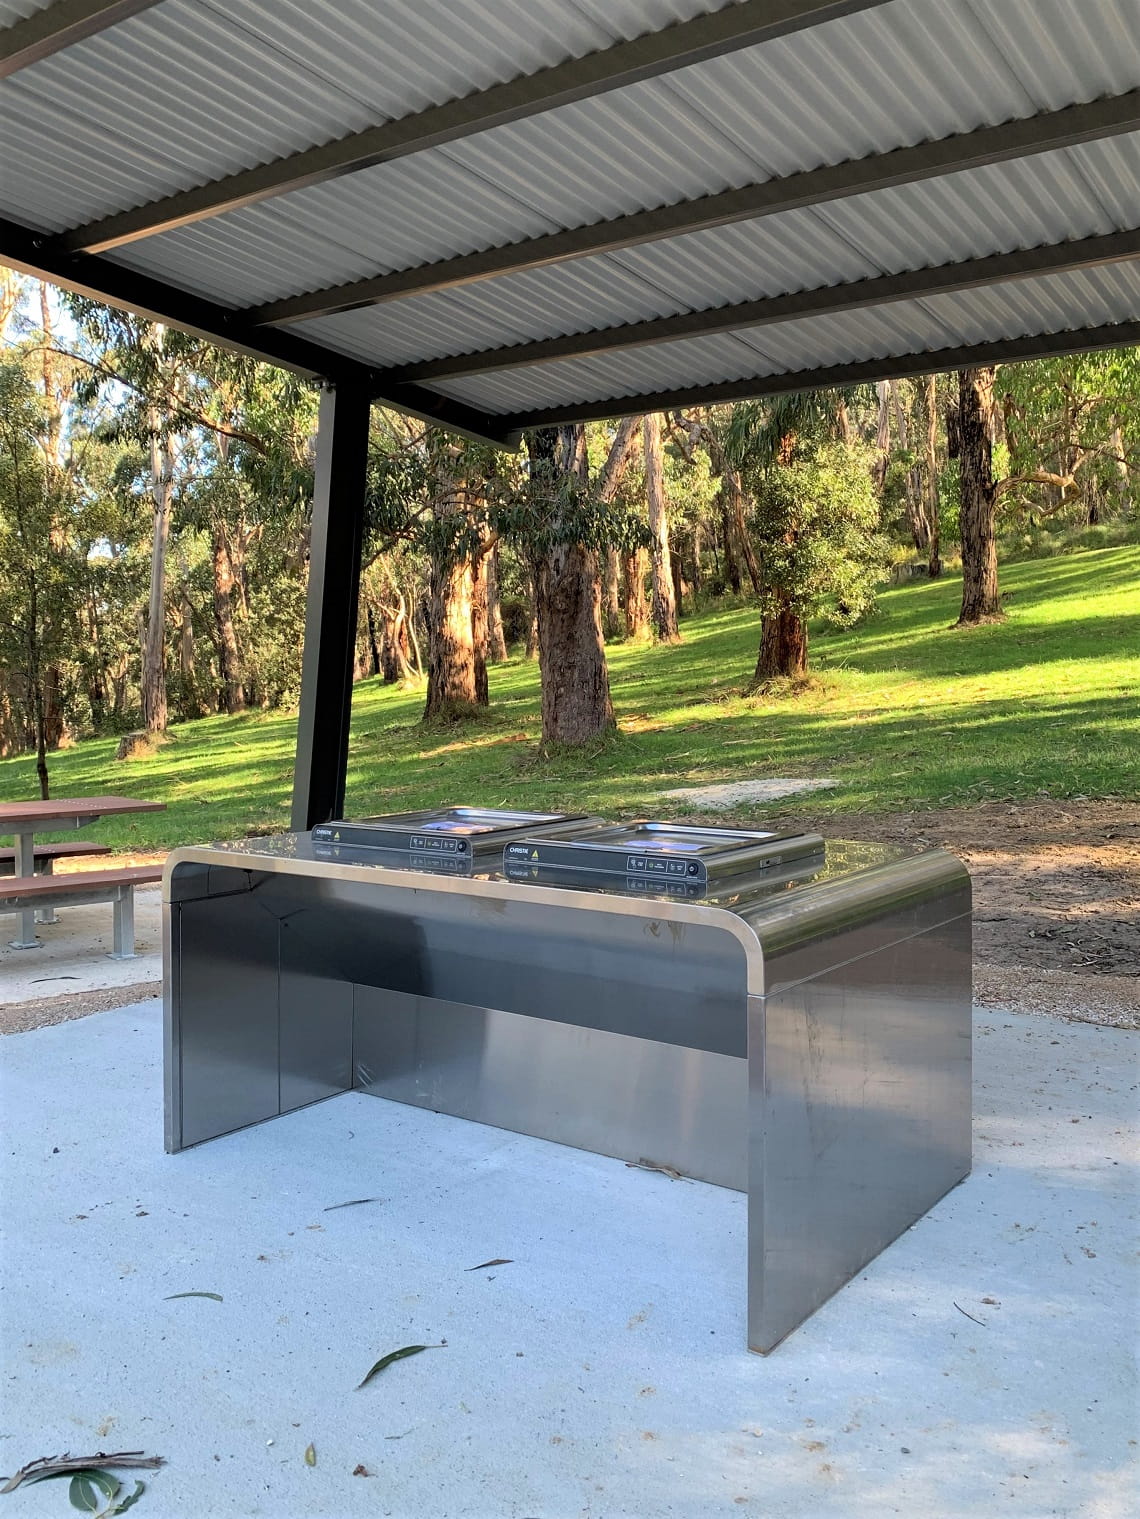 A stainless steel electric barbecue sits on top of a newly-poured concrete slab. The barbecue is under an open shelter with a corrugated iron roof.